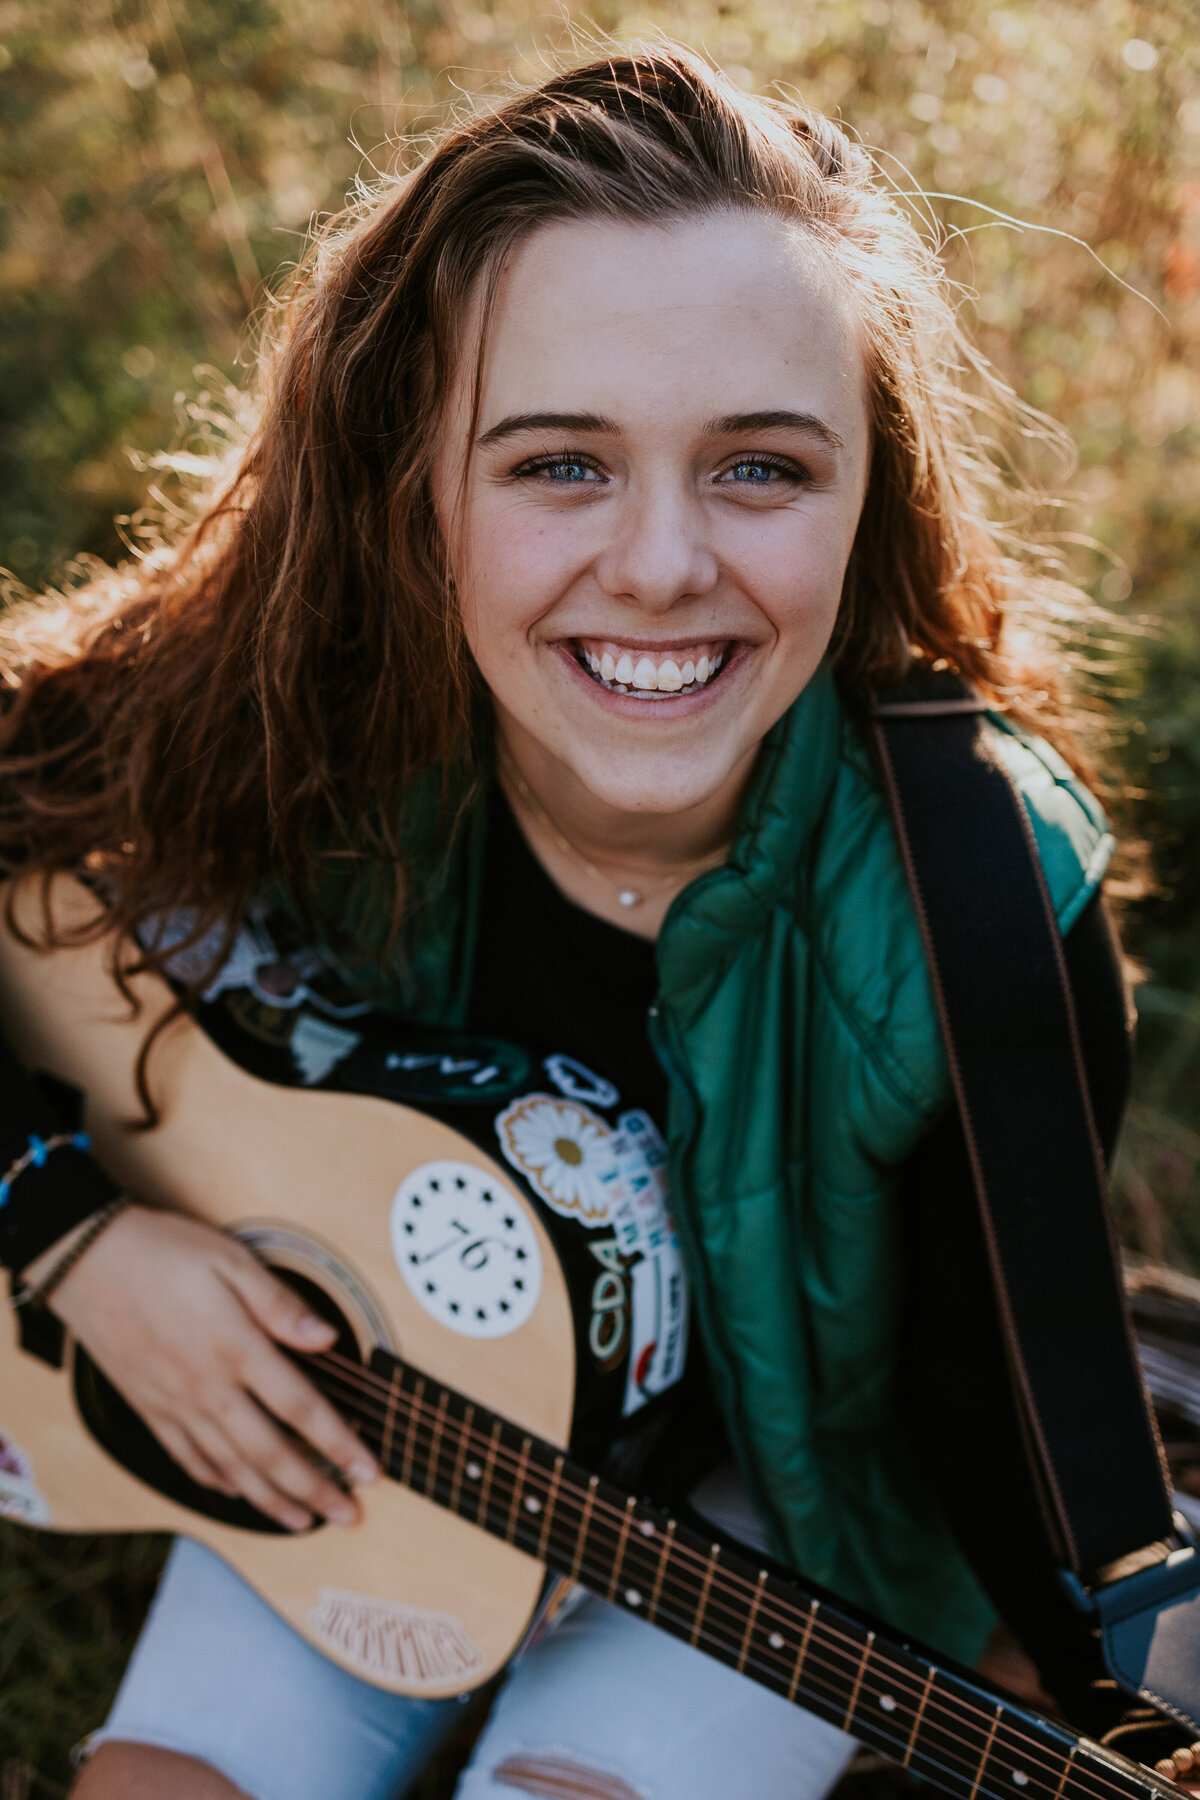 Young woman holding guitar covered in stickers looks up at camera and smiles.